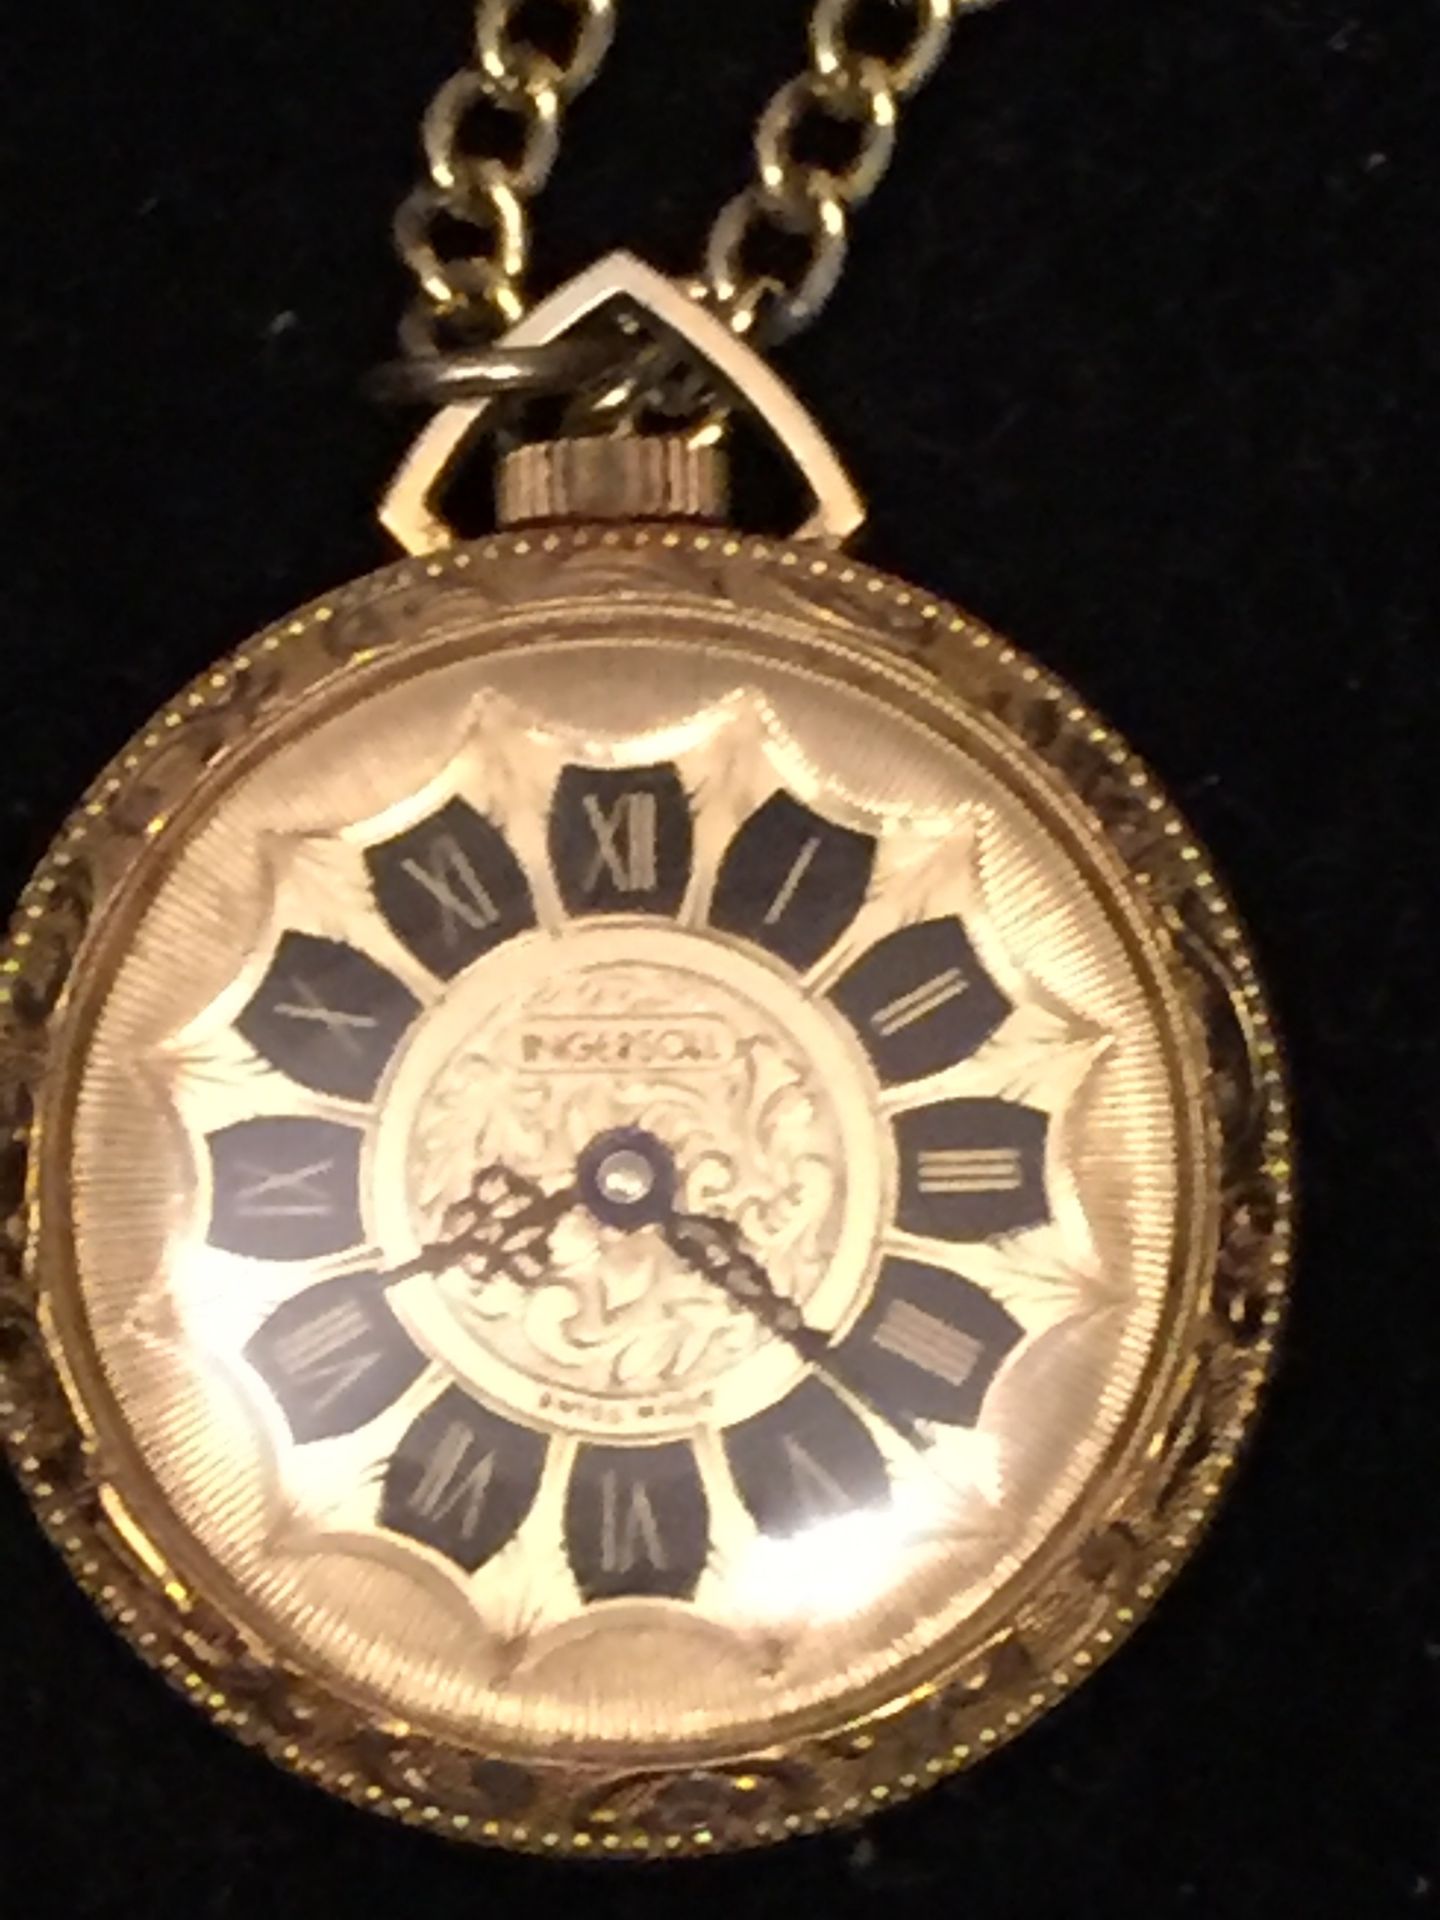 Ingersoll pocket watch. Hand-winding pocket watch with chain. Train pocket watch. - Image 3 of 7